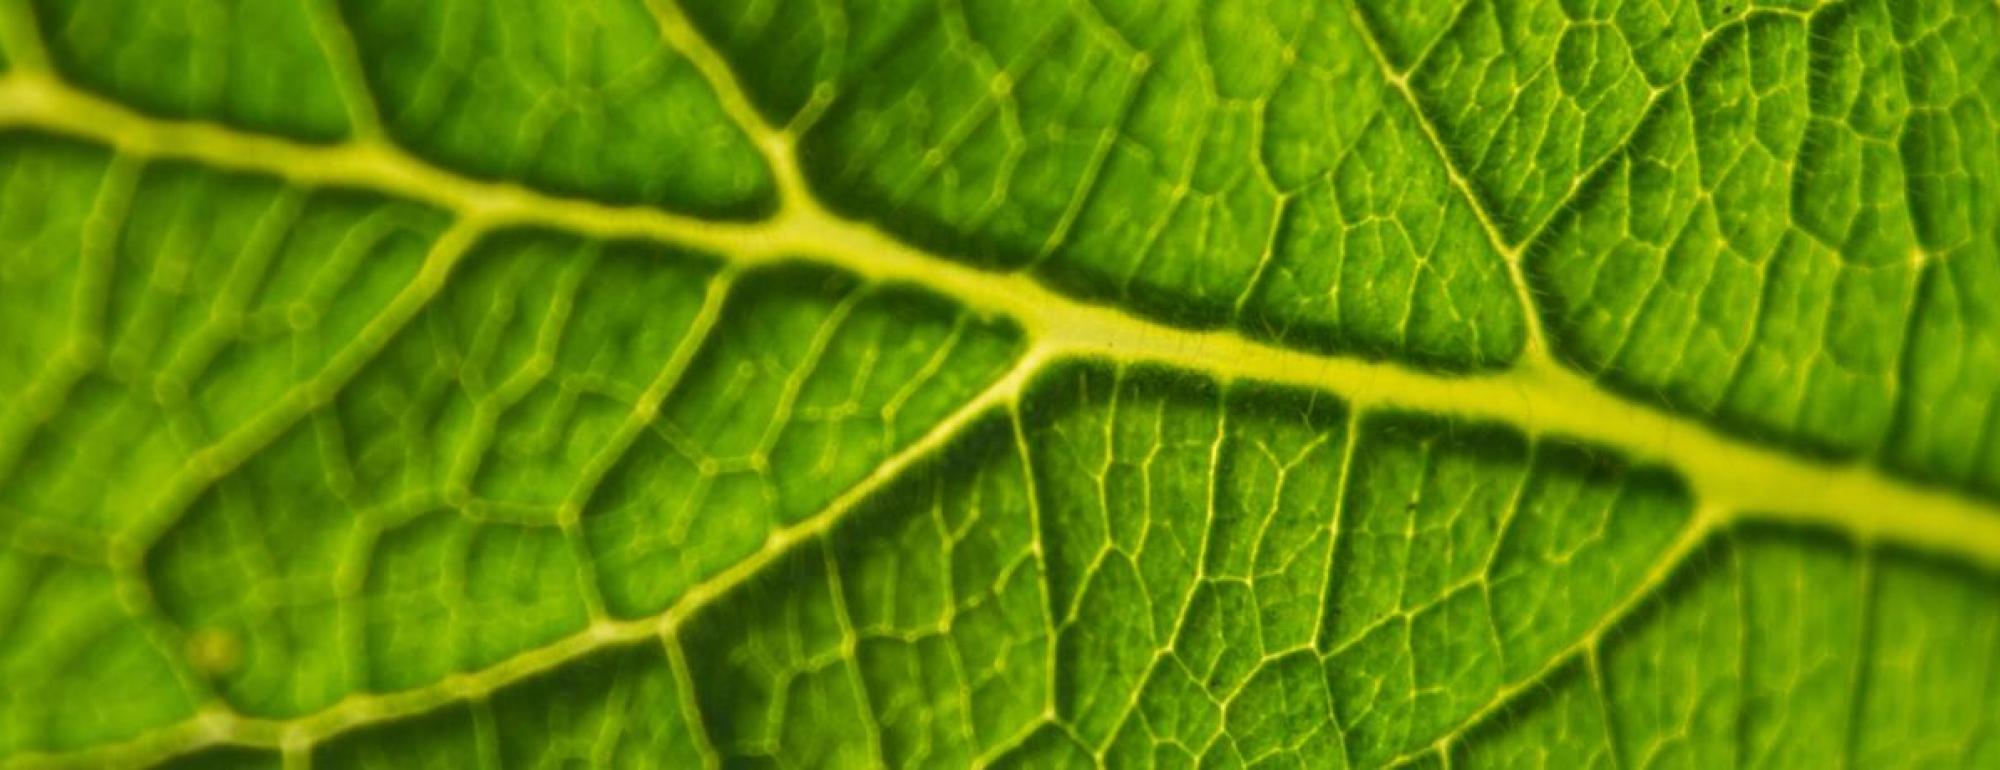 zoomed in leaf